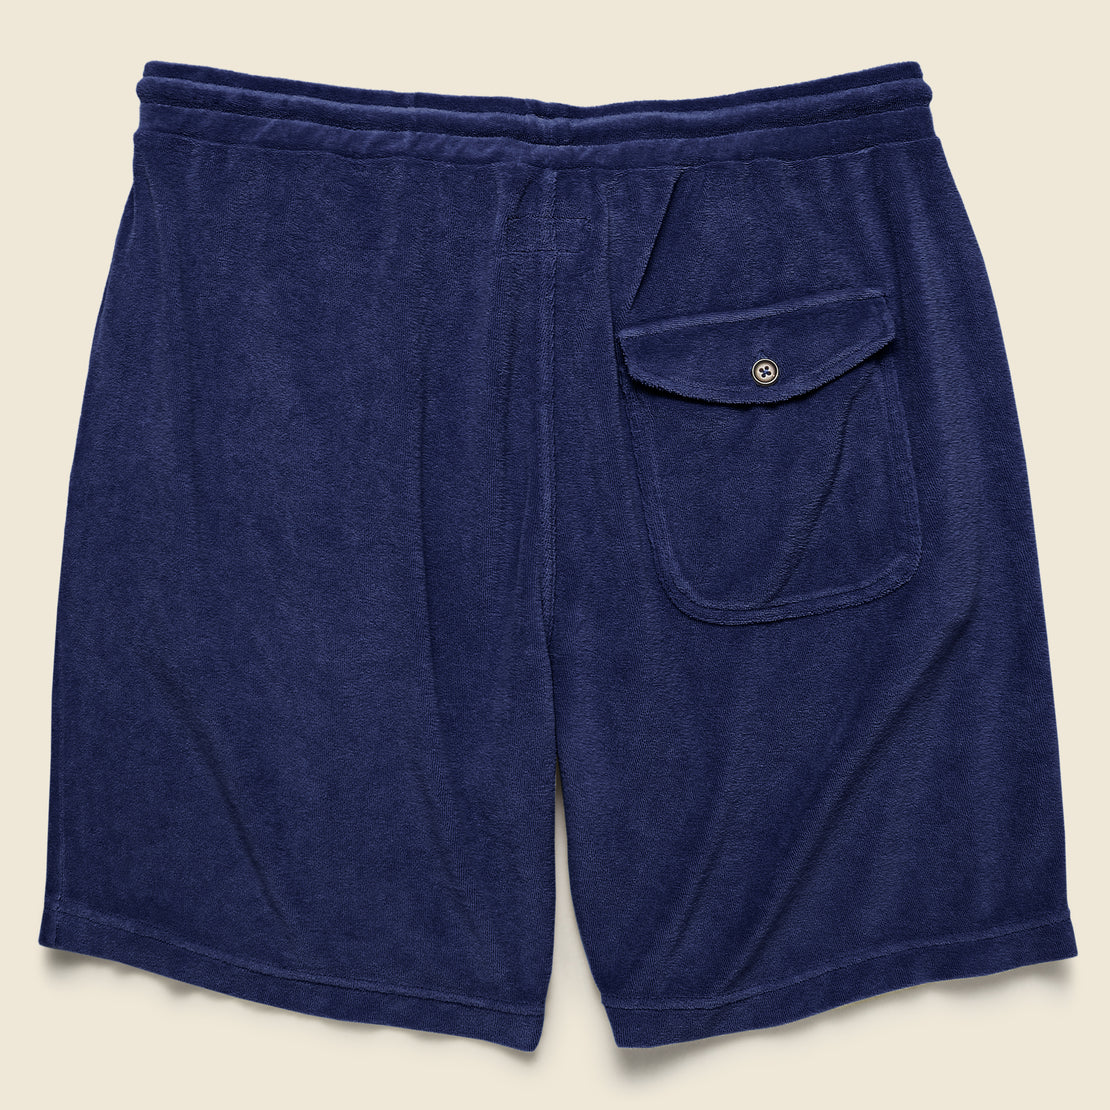 Terry Fleece Beach Short - Ink Blue - Universal Works - STAG Provisions - Shorts - Lounge